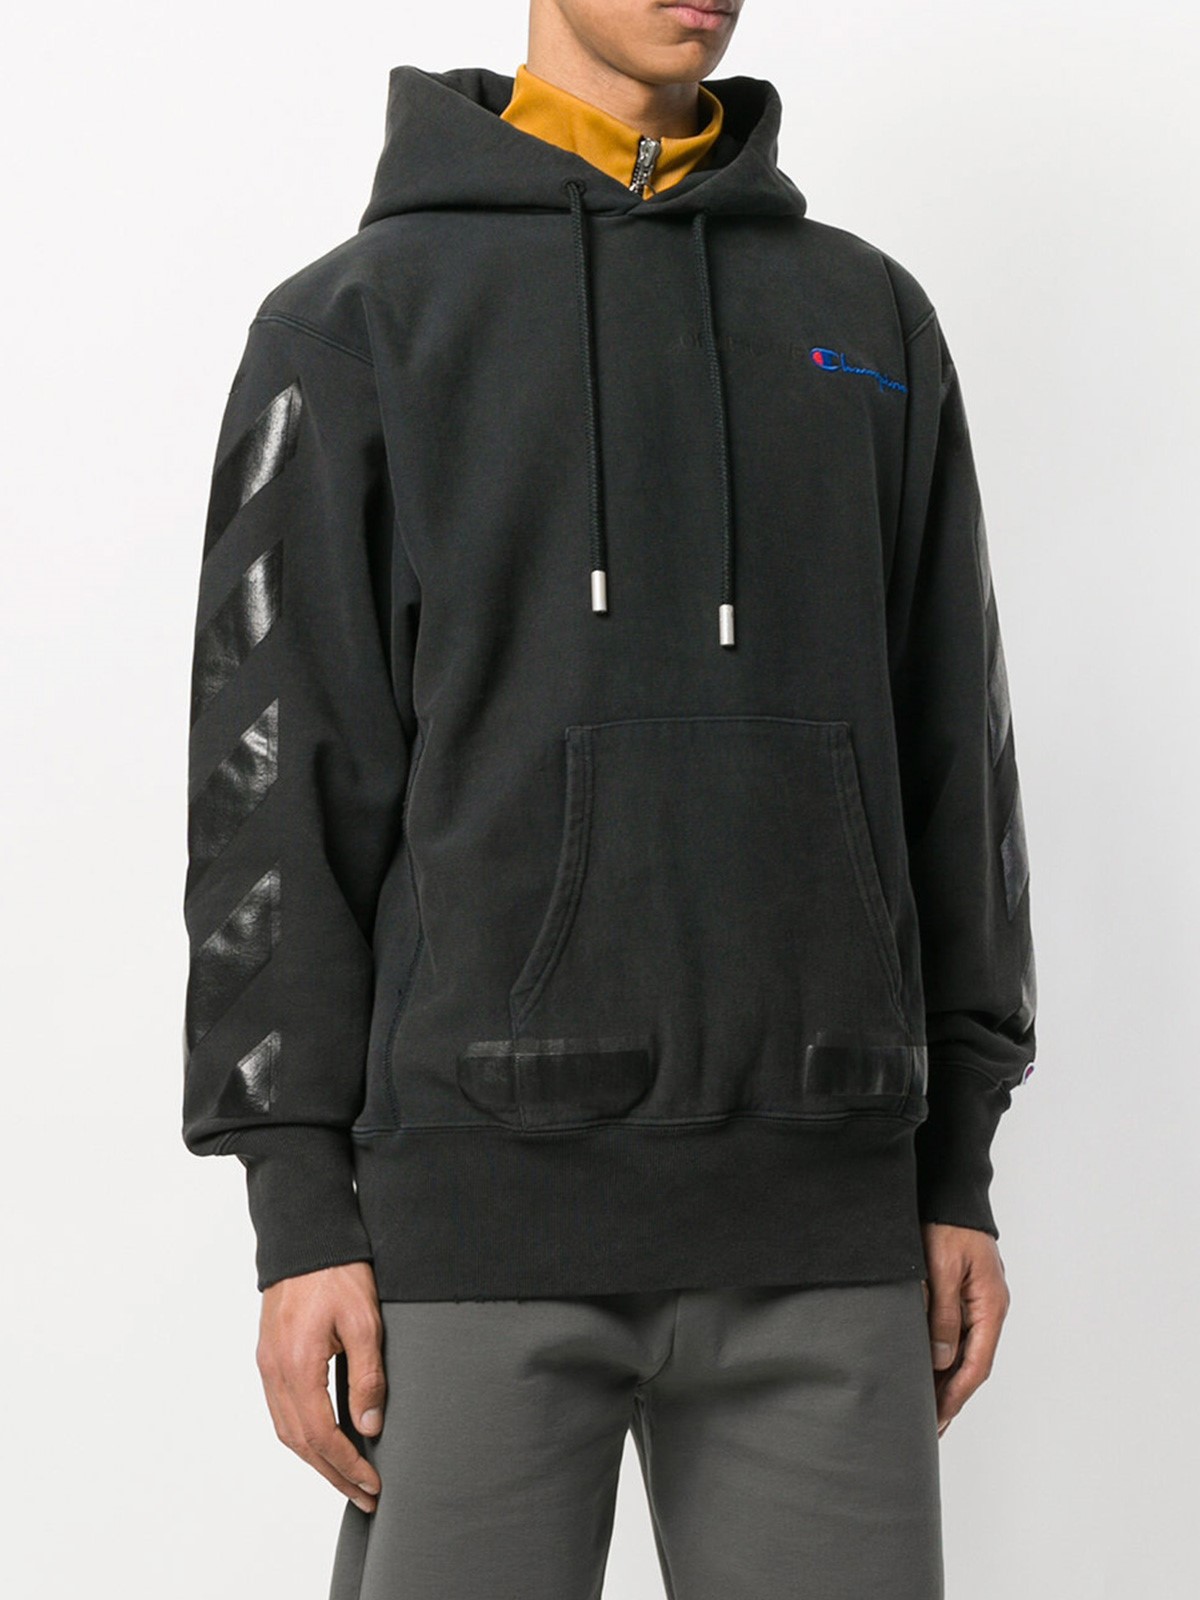 off-white CHAMPION FOR OFF-WHITE HOODIE SWEATSHIRT available on ...